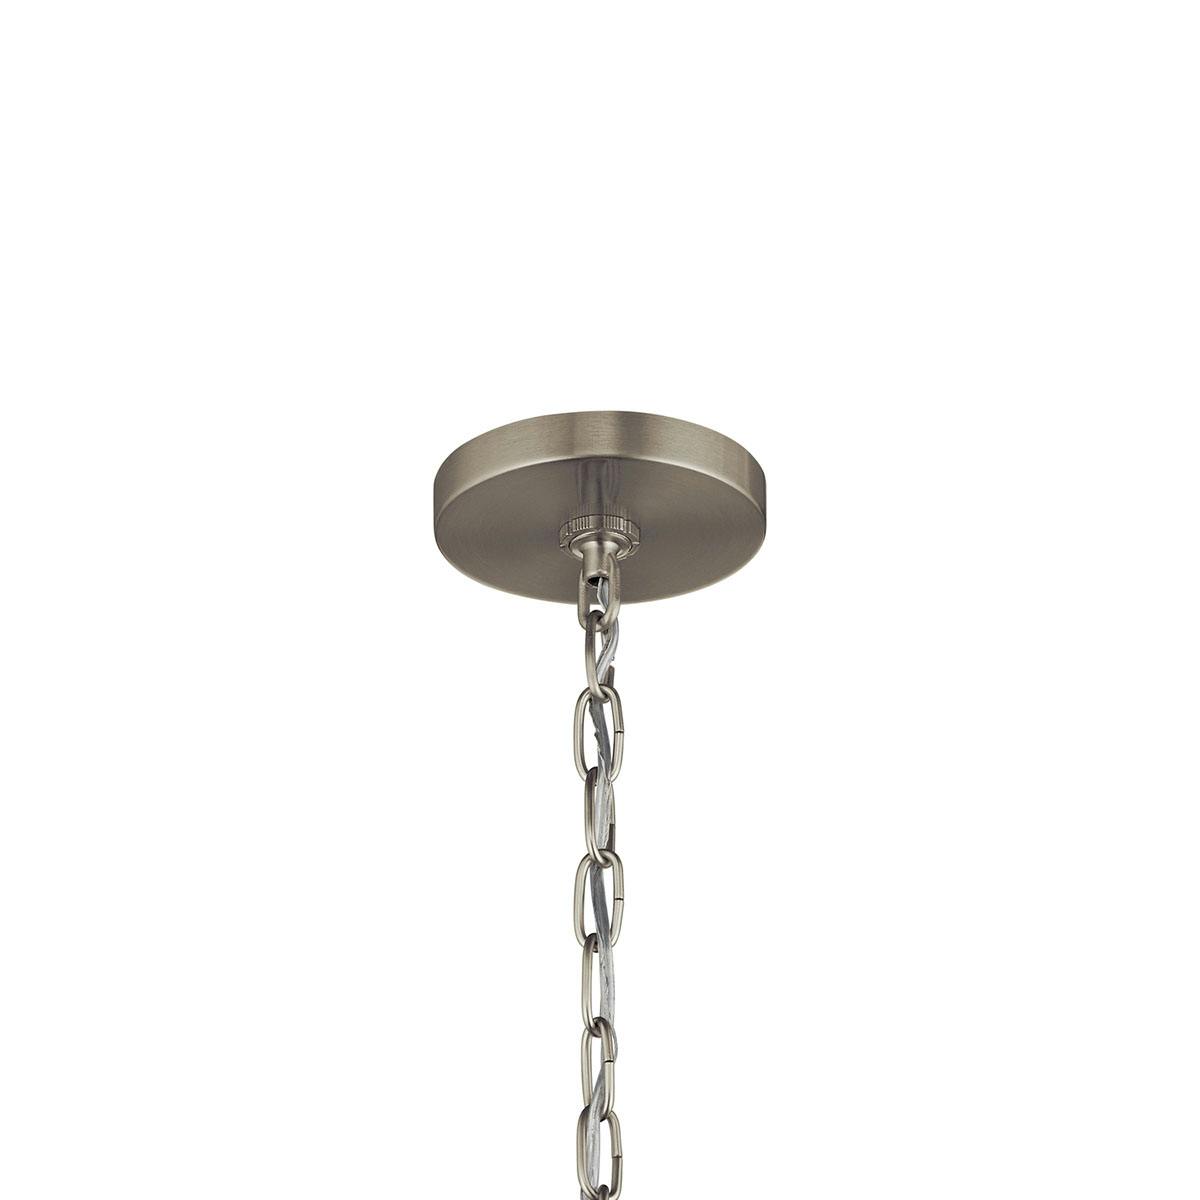 Canopy image of the Stetton Pendant 82268 on a white background